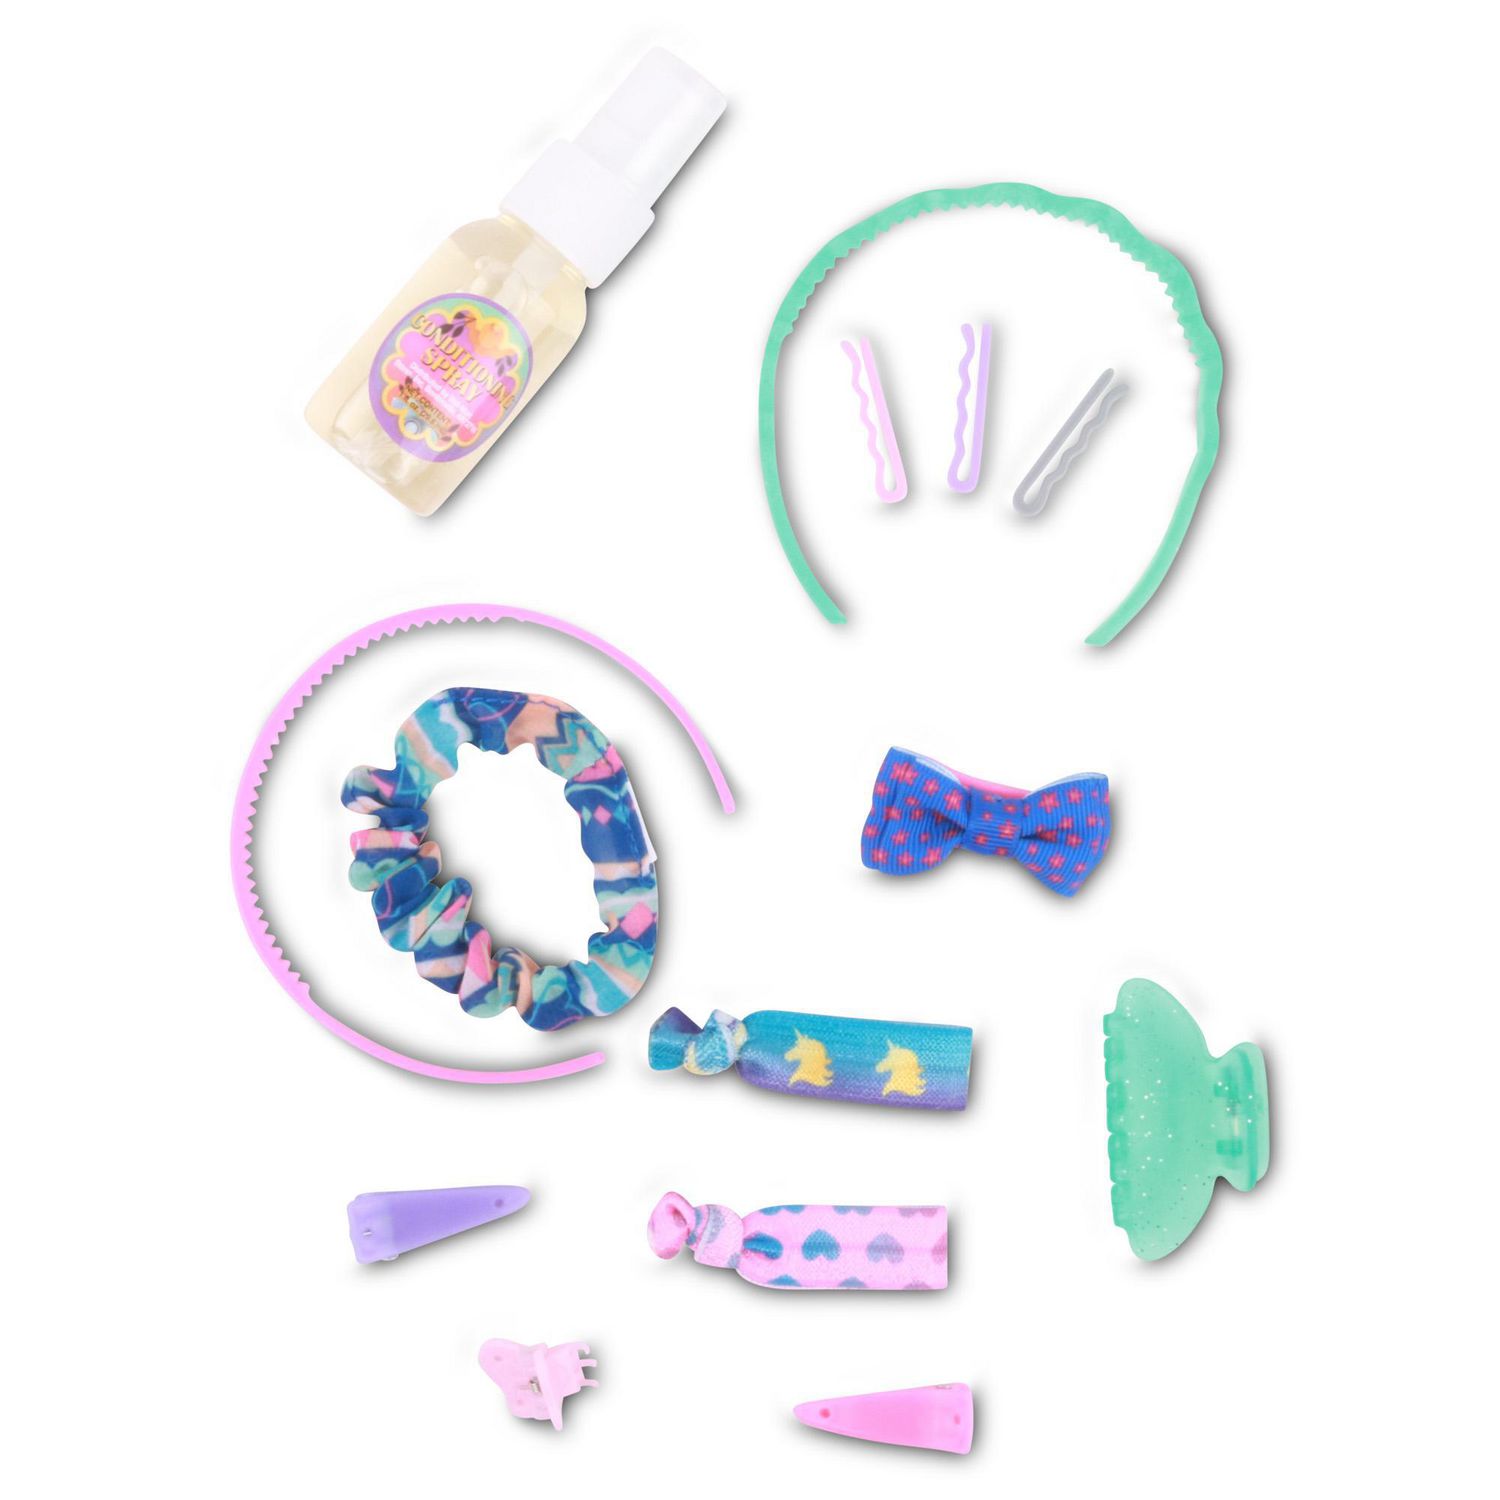 My Life As Hair Accessories Play Set for 18” Dolls | Walmart Canada